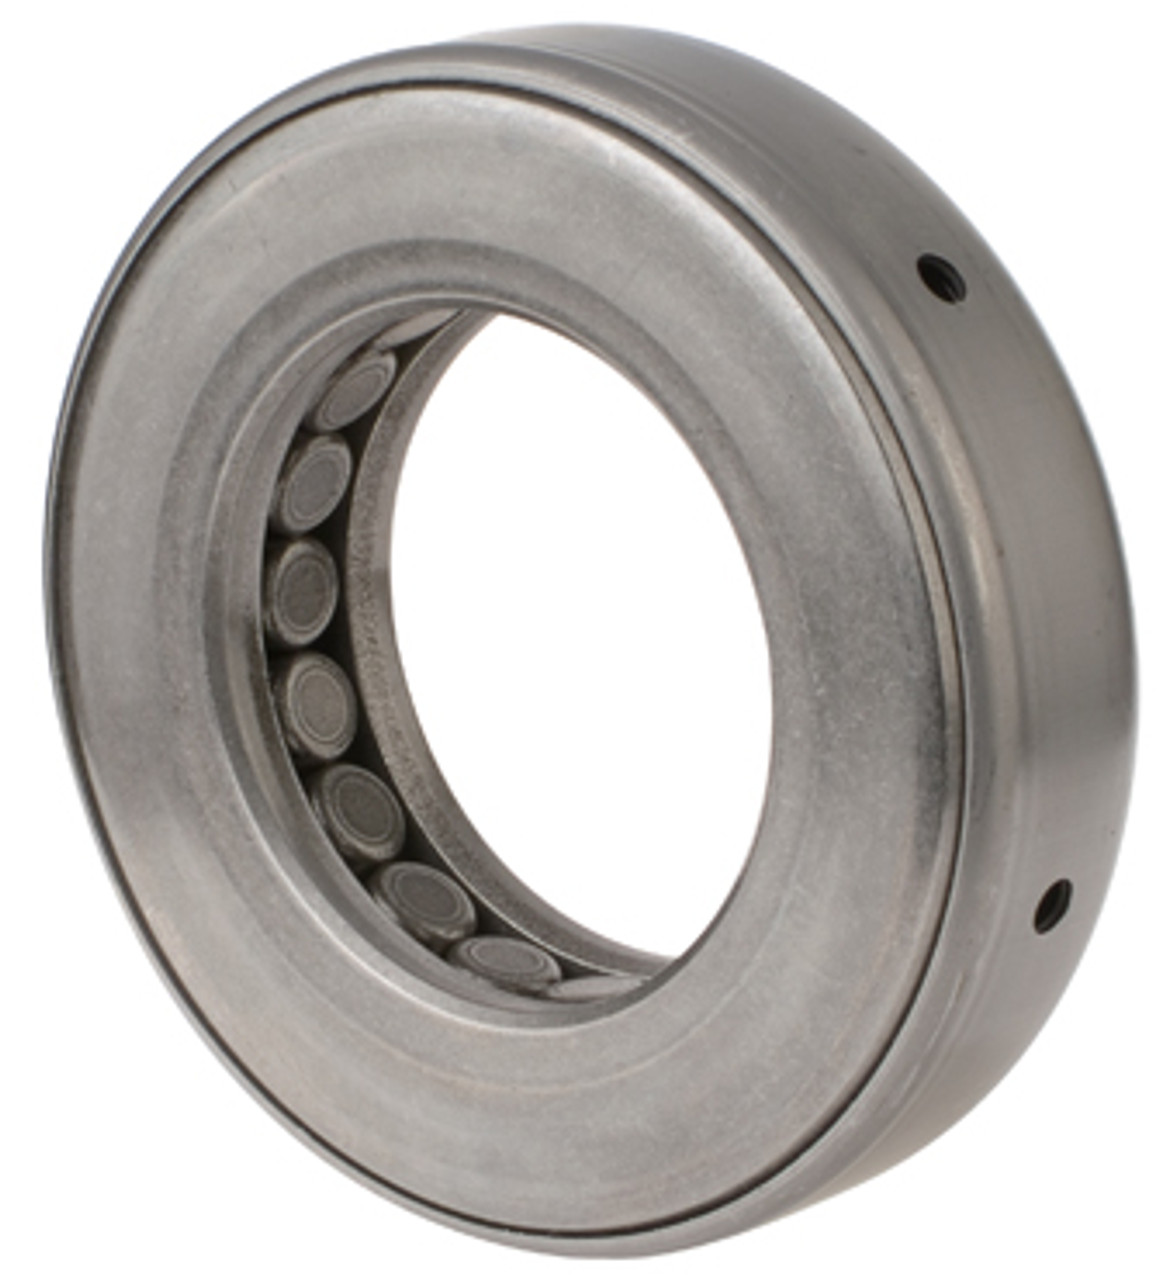 Timken® Stamped Race Thrust Bearing  T139W-904A2